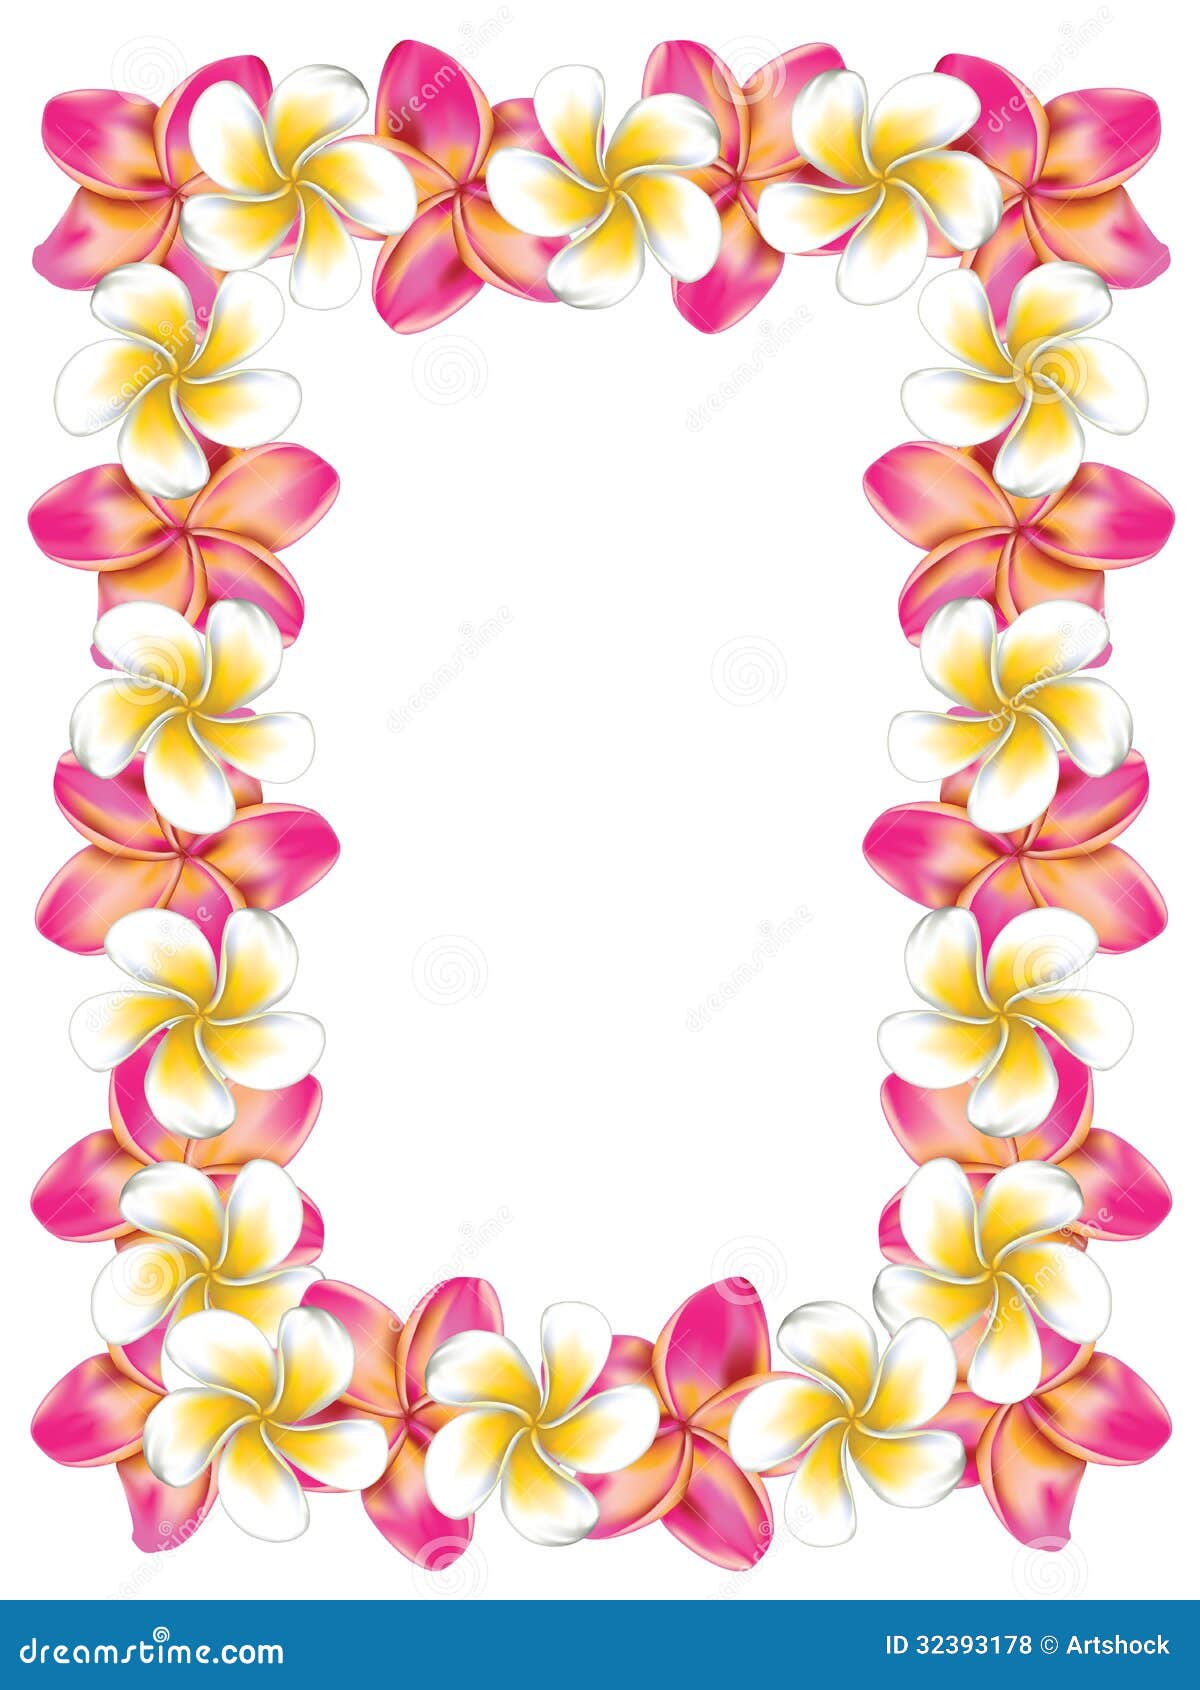 White And Pink Frangipani Flowers Frame Royalty Free Stock Photos 